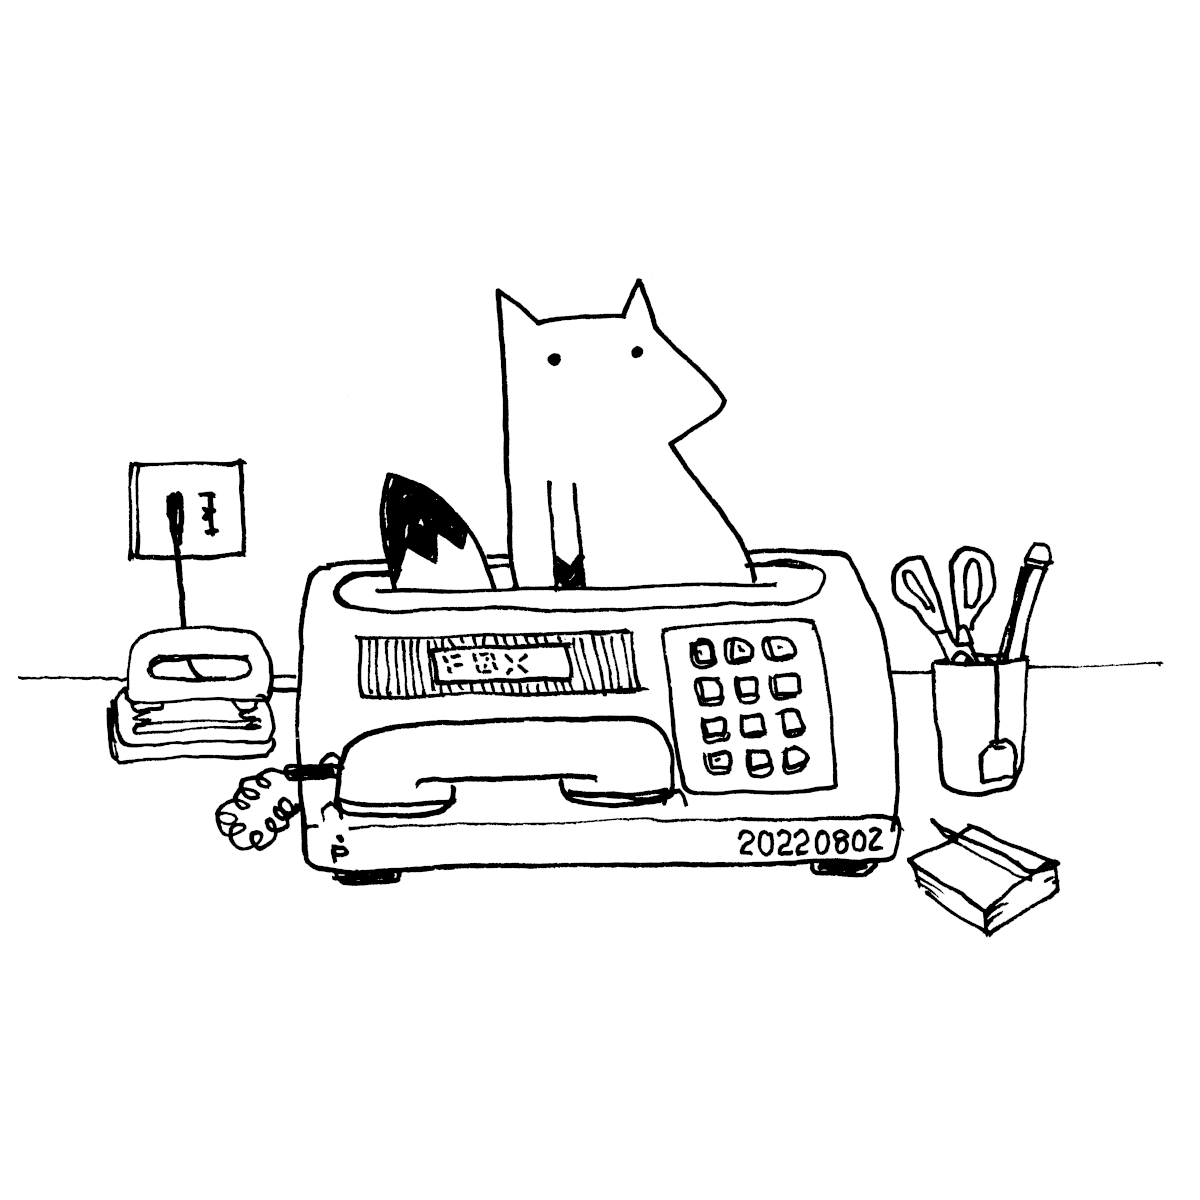 a drawing of a fox coming out of a fax machine